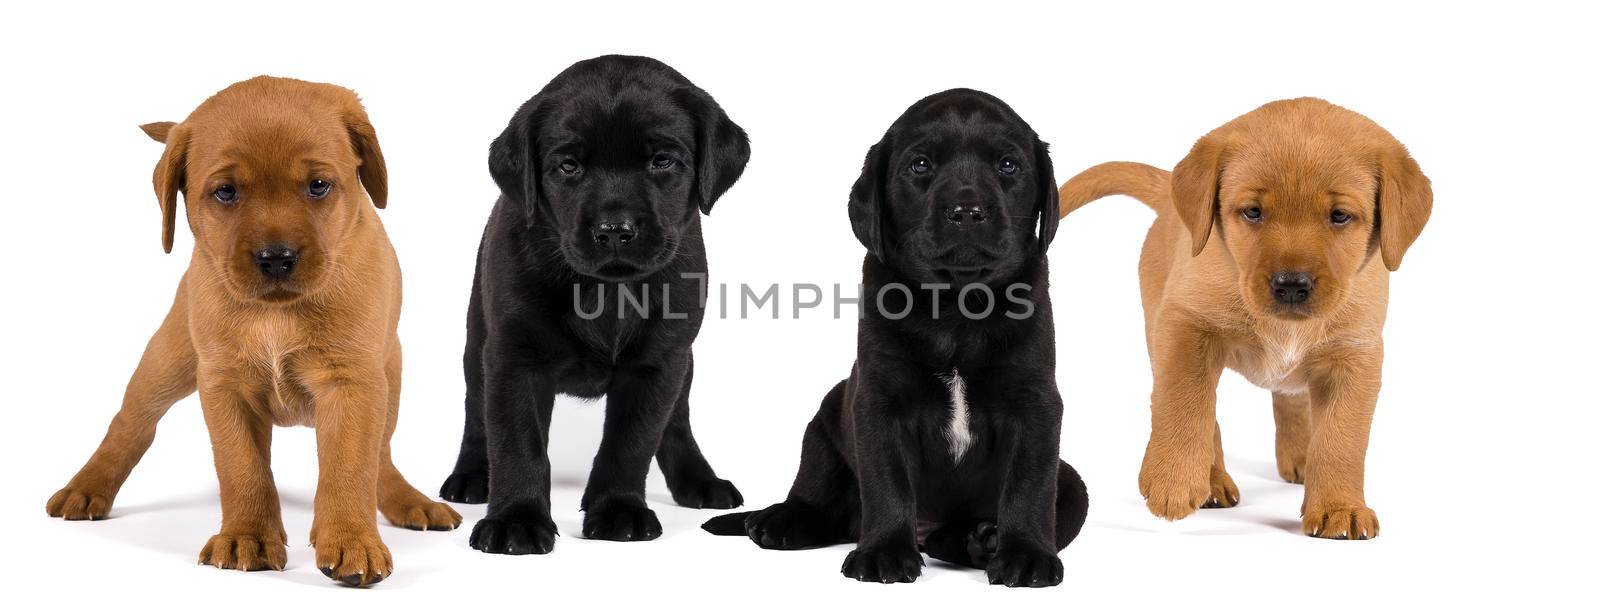 Banner with black and blonde labrador retriever puppy's  isolated on white background by LeoniekvanderVliet